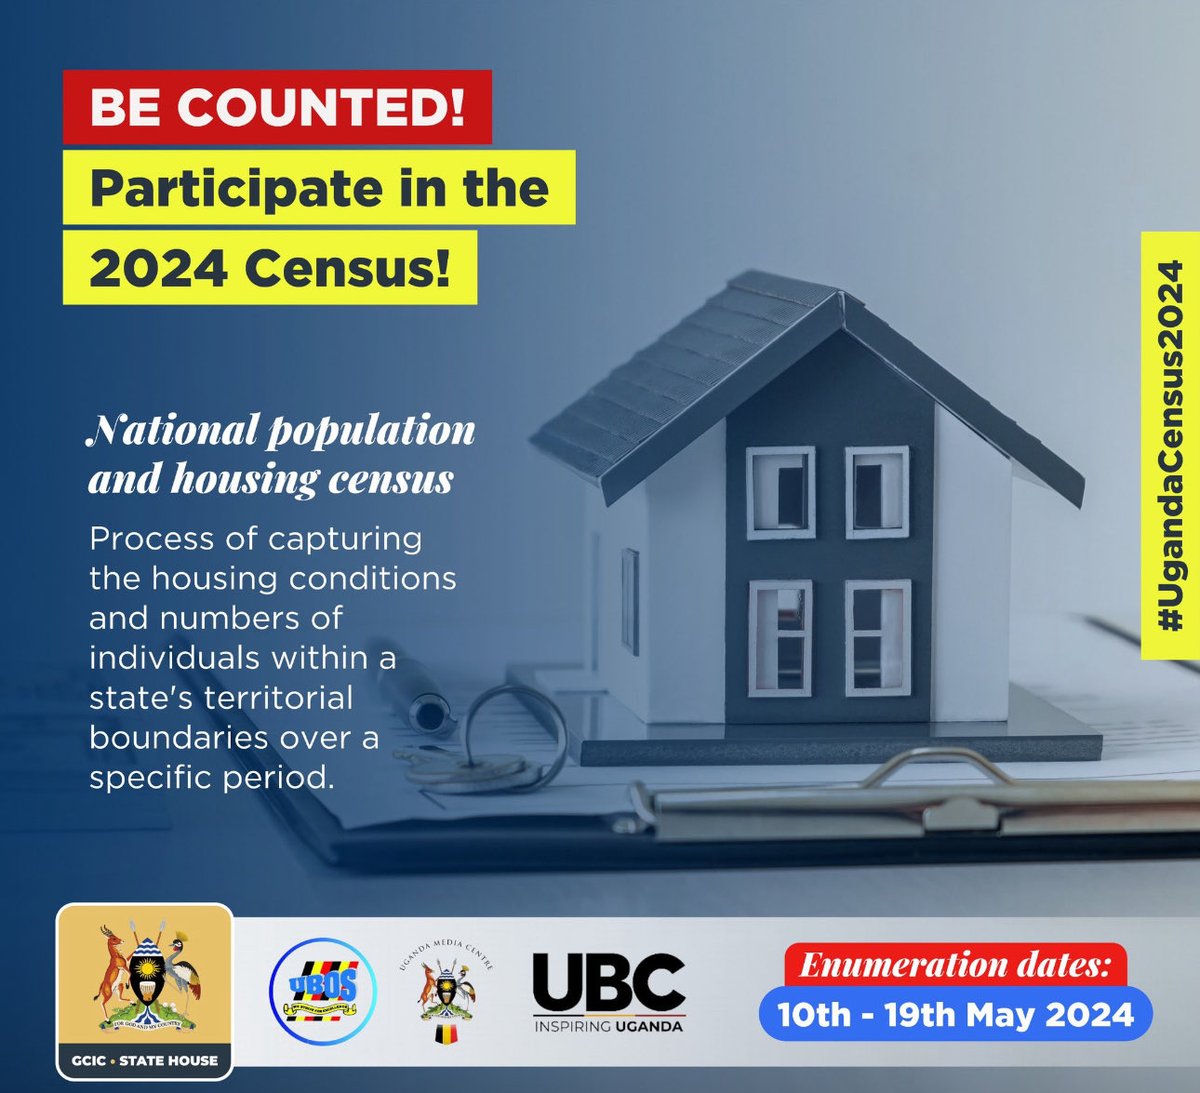 6 days to go! ⁦@StatisticsUg⁩ will conduct National Population and Housing Census starting May 10th 2024, for 10 days. Be ready to be counted. 'It Matters to be counted'. ⁦@OPMUganda⁩, ⁦@mofpedU⁩, ⁦@MoICT_Ug⁩, ⁦@UgandaMediaCent⁩